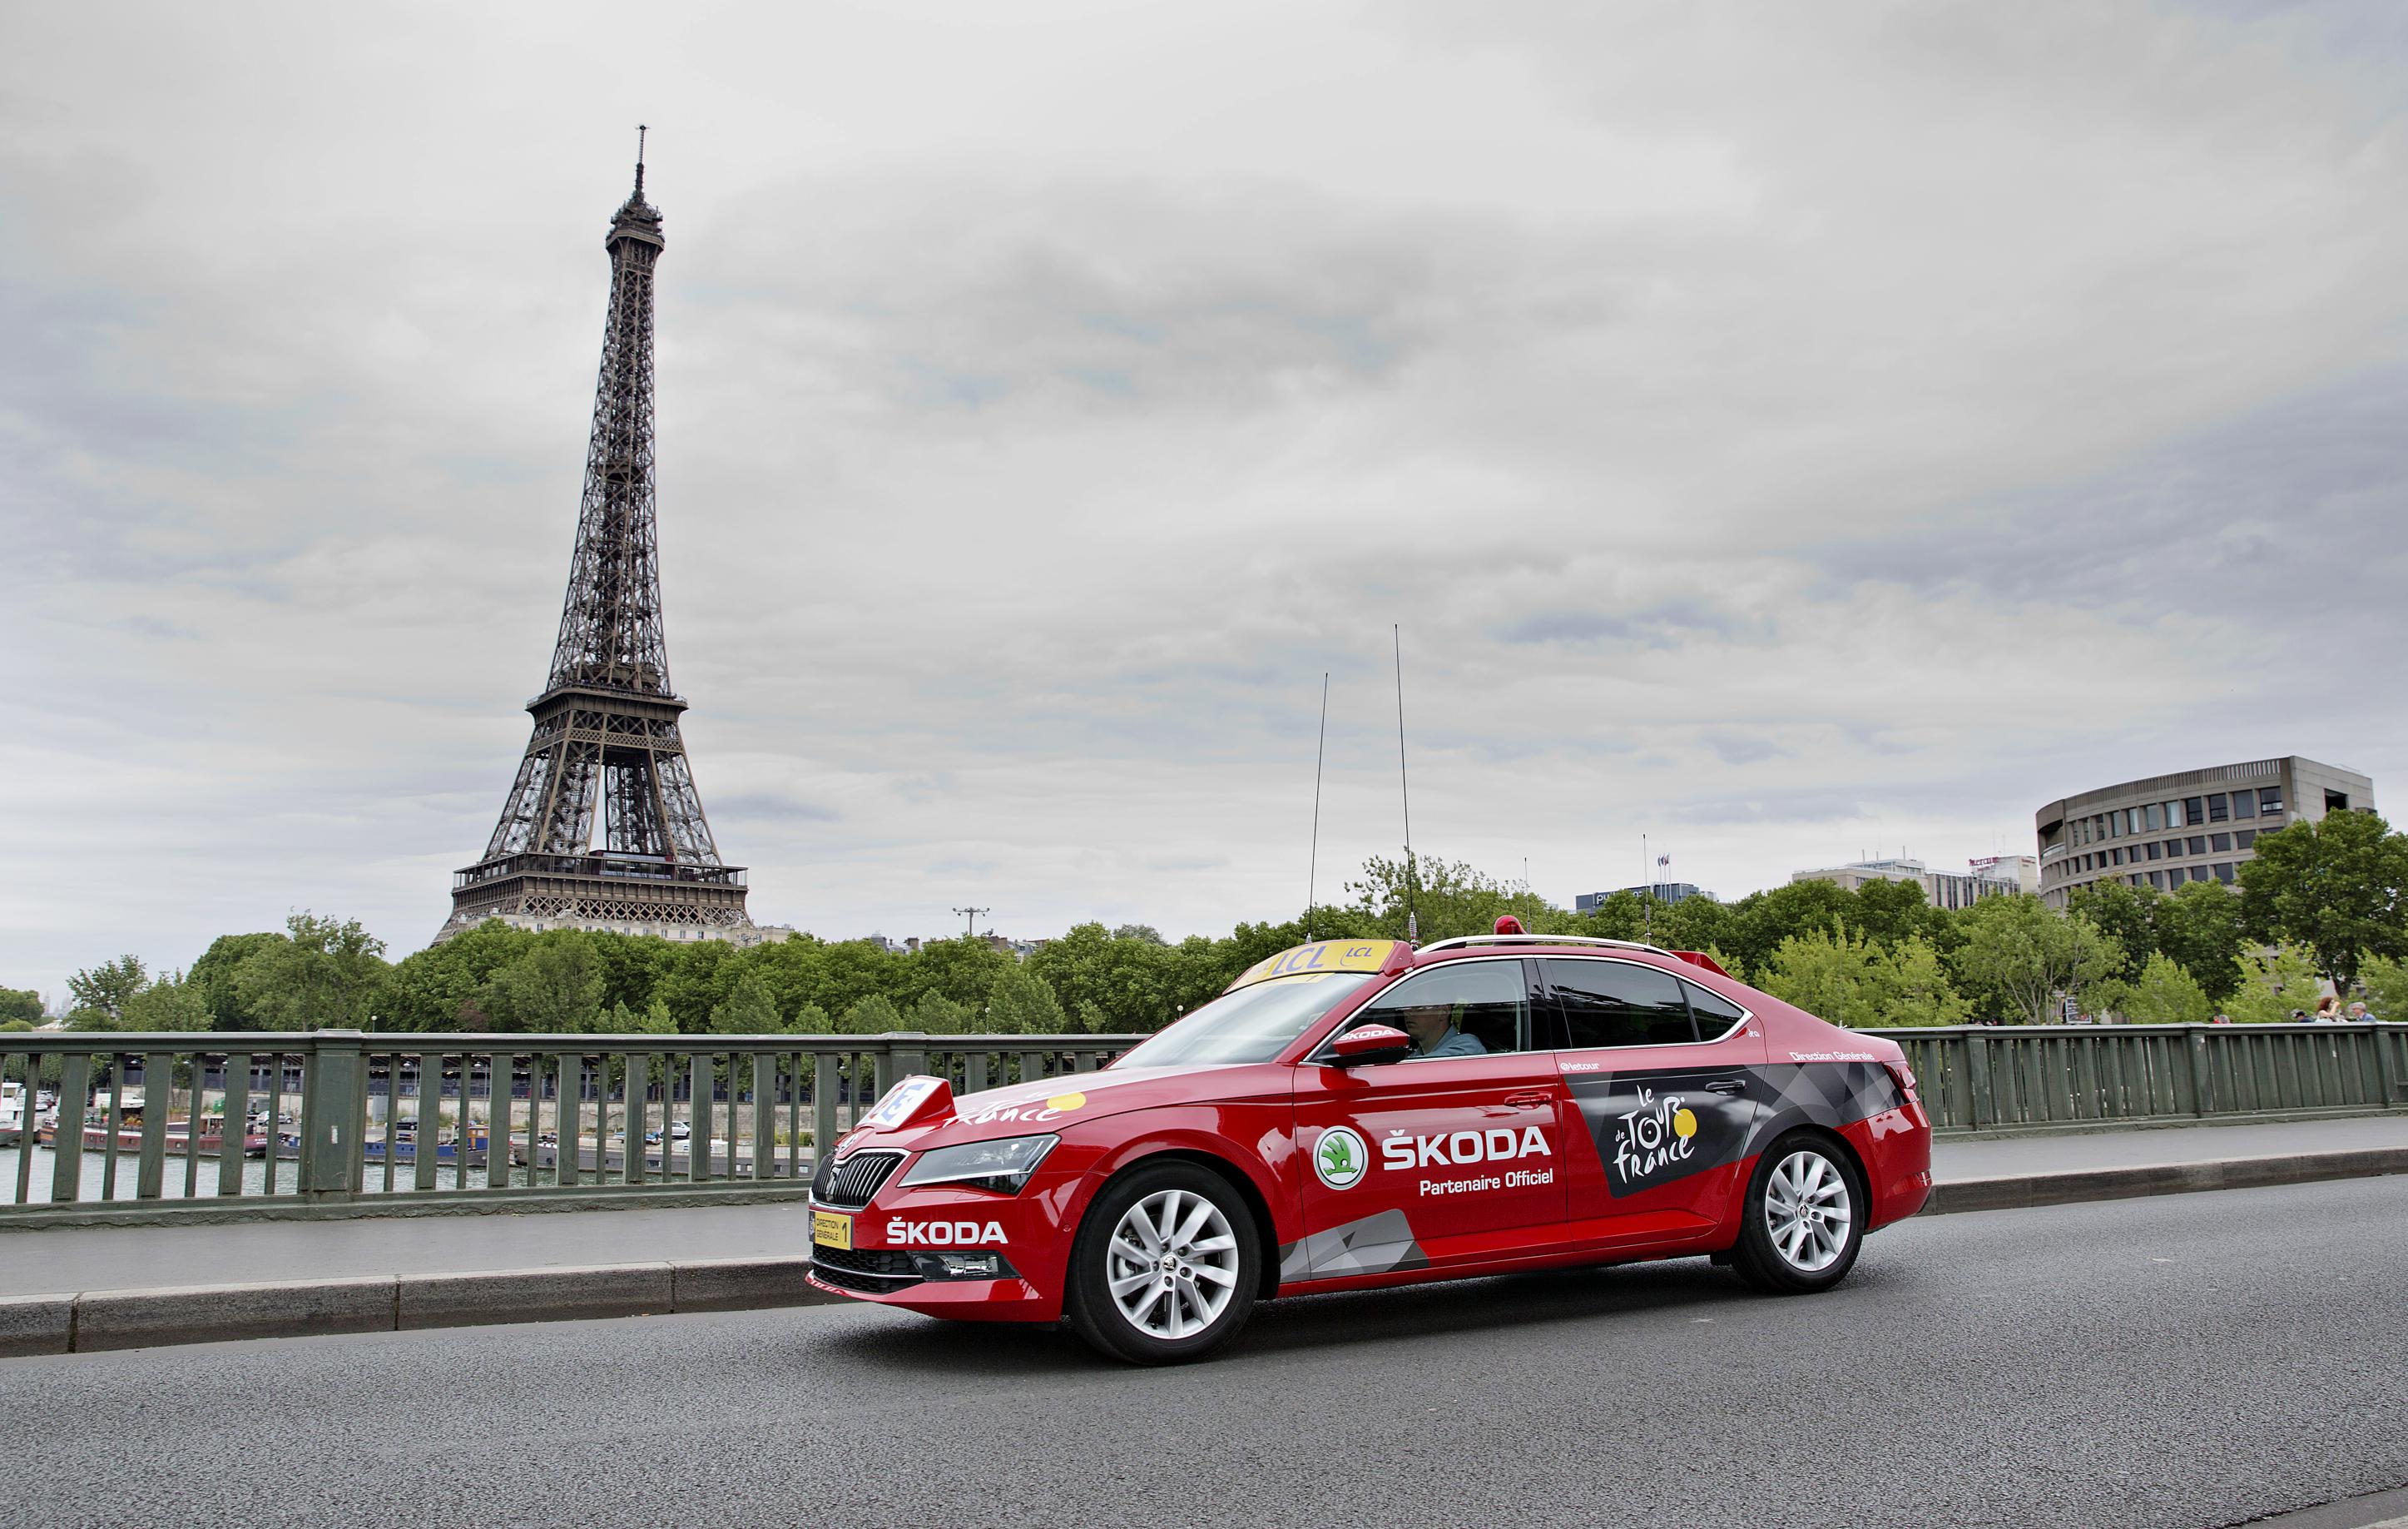 Skoda to Sponsor This Year's Tour de France, Will Showcase the New Superb -  autoevolution